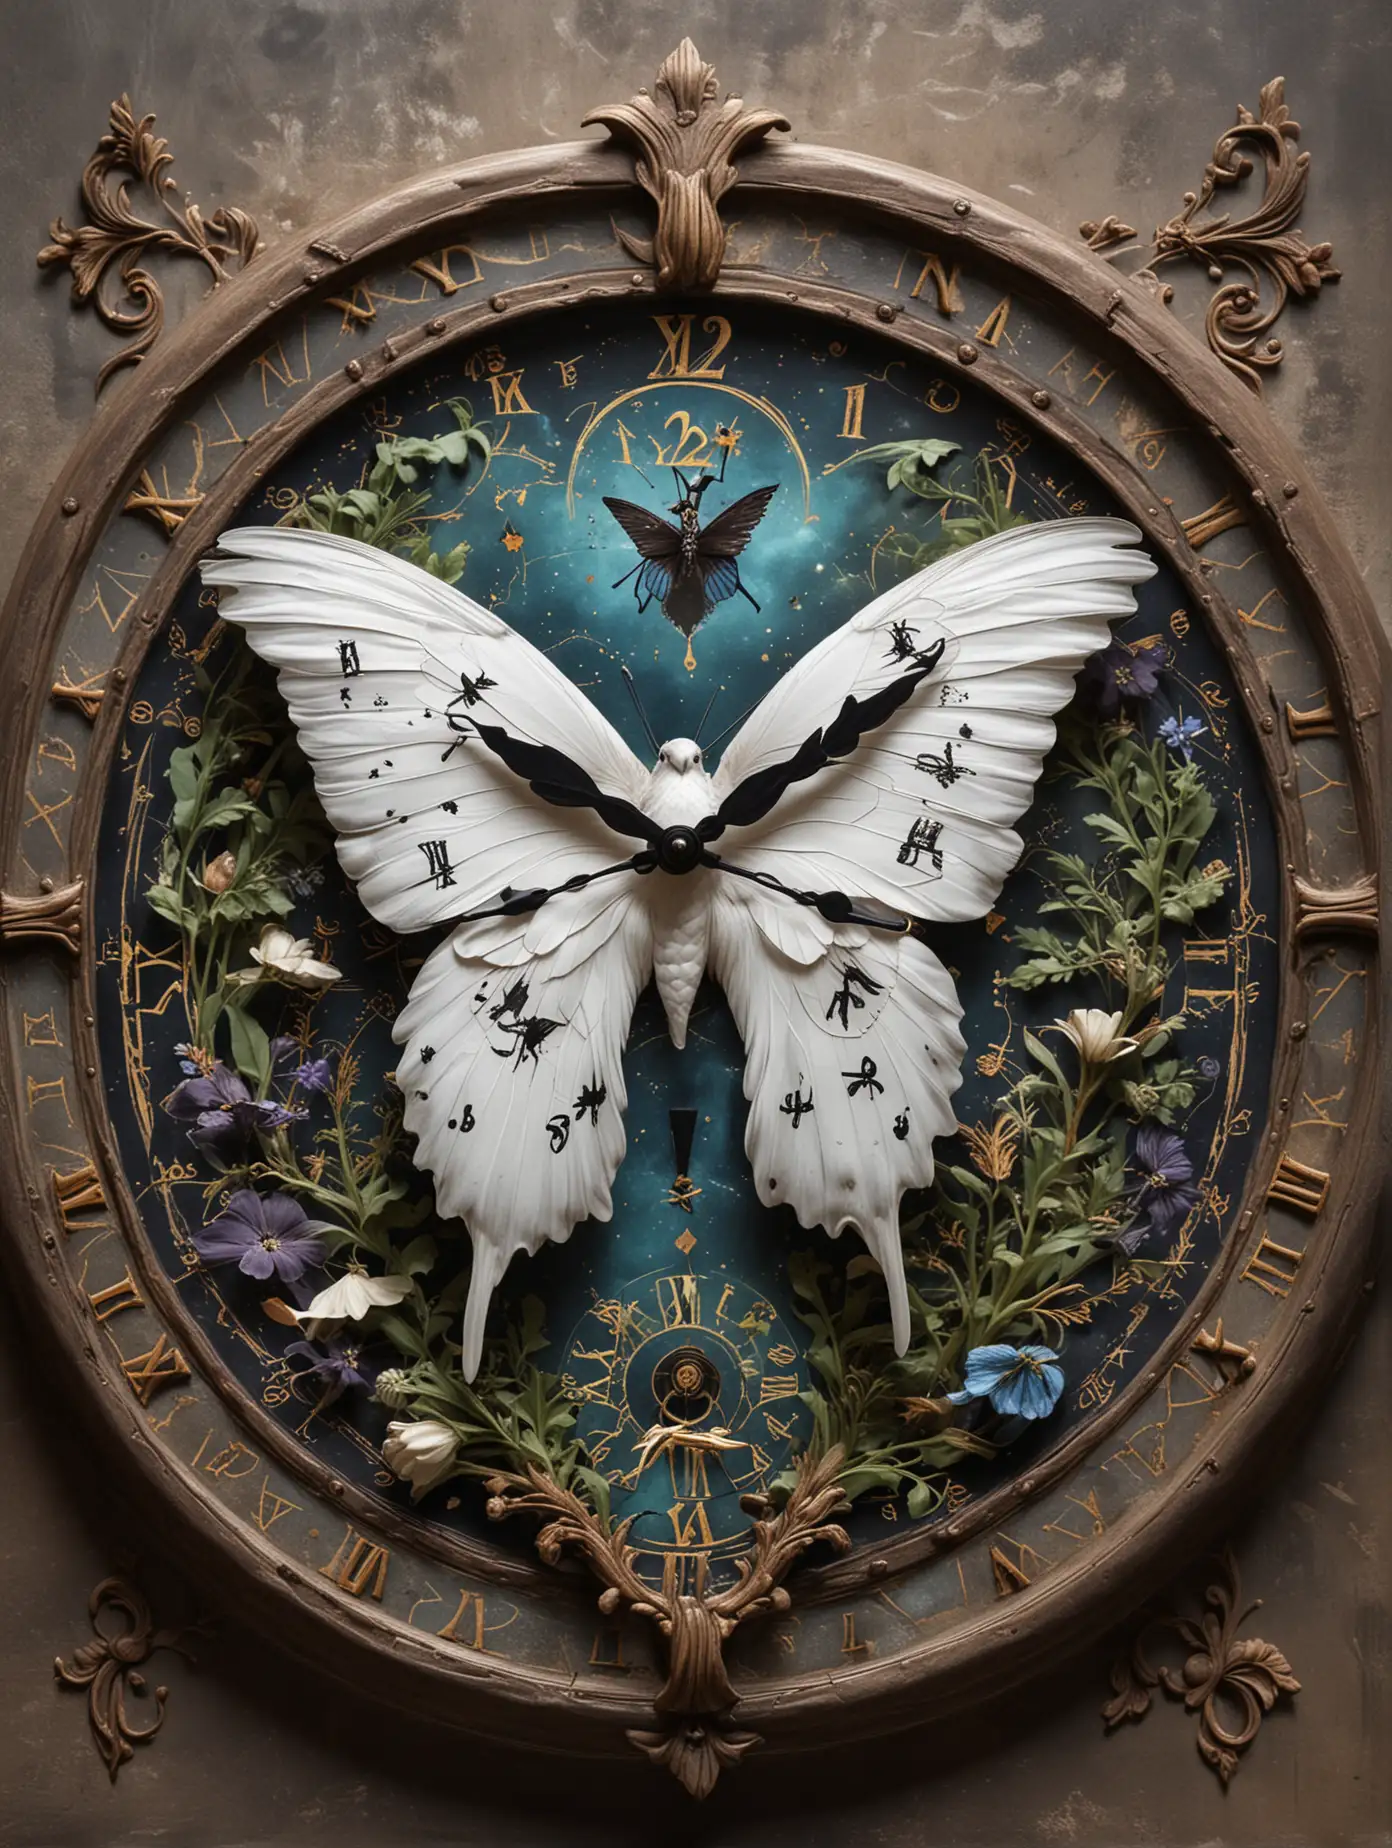 Fantasy image. A clock face with a butterfly visible on it. Characteristics of the butterfly: the right wing is black and purple, the left wing is white and blue. At 12 o'clock there is a sun symbol. At 6 o'clock there is a moon symbol. At 3 o'clock there is a bat symbol. At 9 o'clock there is a symbol of a white dove. The right side of the clock face is green with plant motifs. The left side of the clock is darker, brownish-black in color with thorn motifs. A magical background with a clock, full of alchemical symbols.